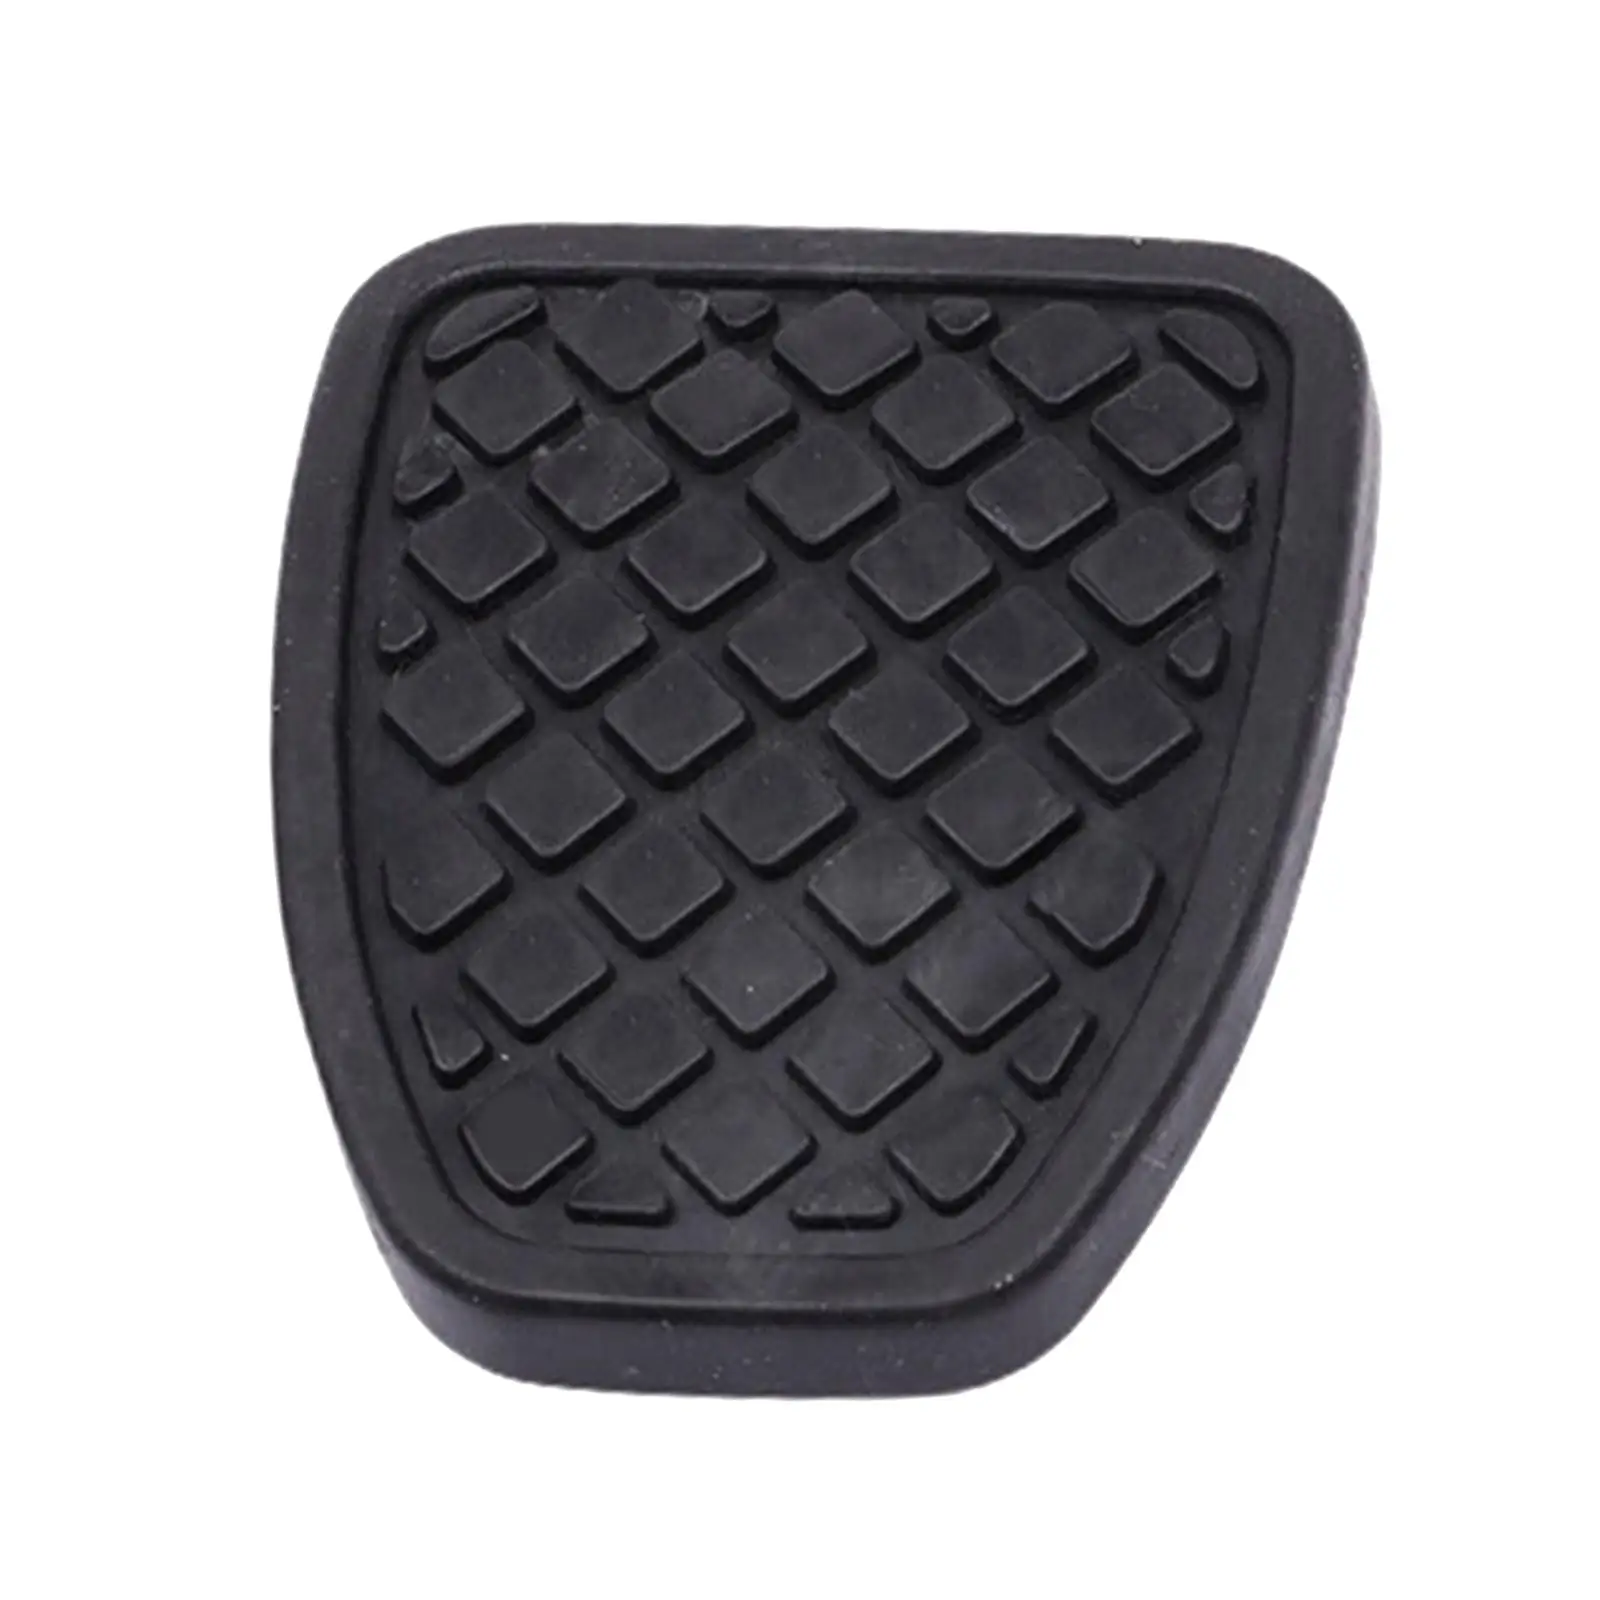 Rubber Brake Clutch Pedal Pad Durable Directly Replace Accessory 36015-ga111 for Subaru Legacy II III IV V Forester 1996-2017